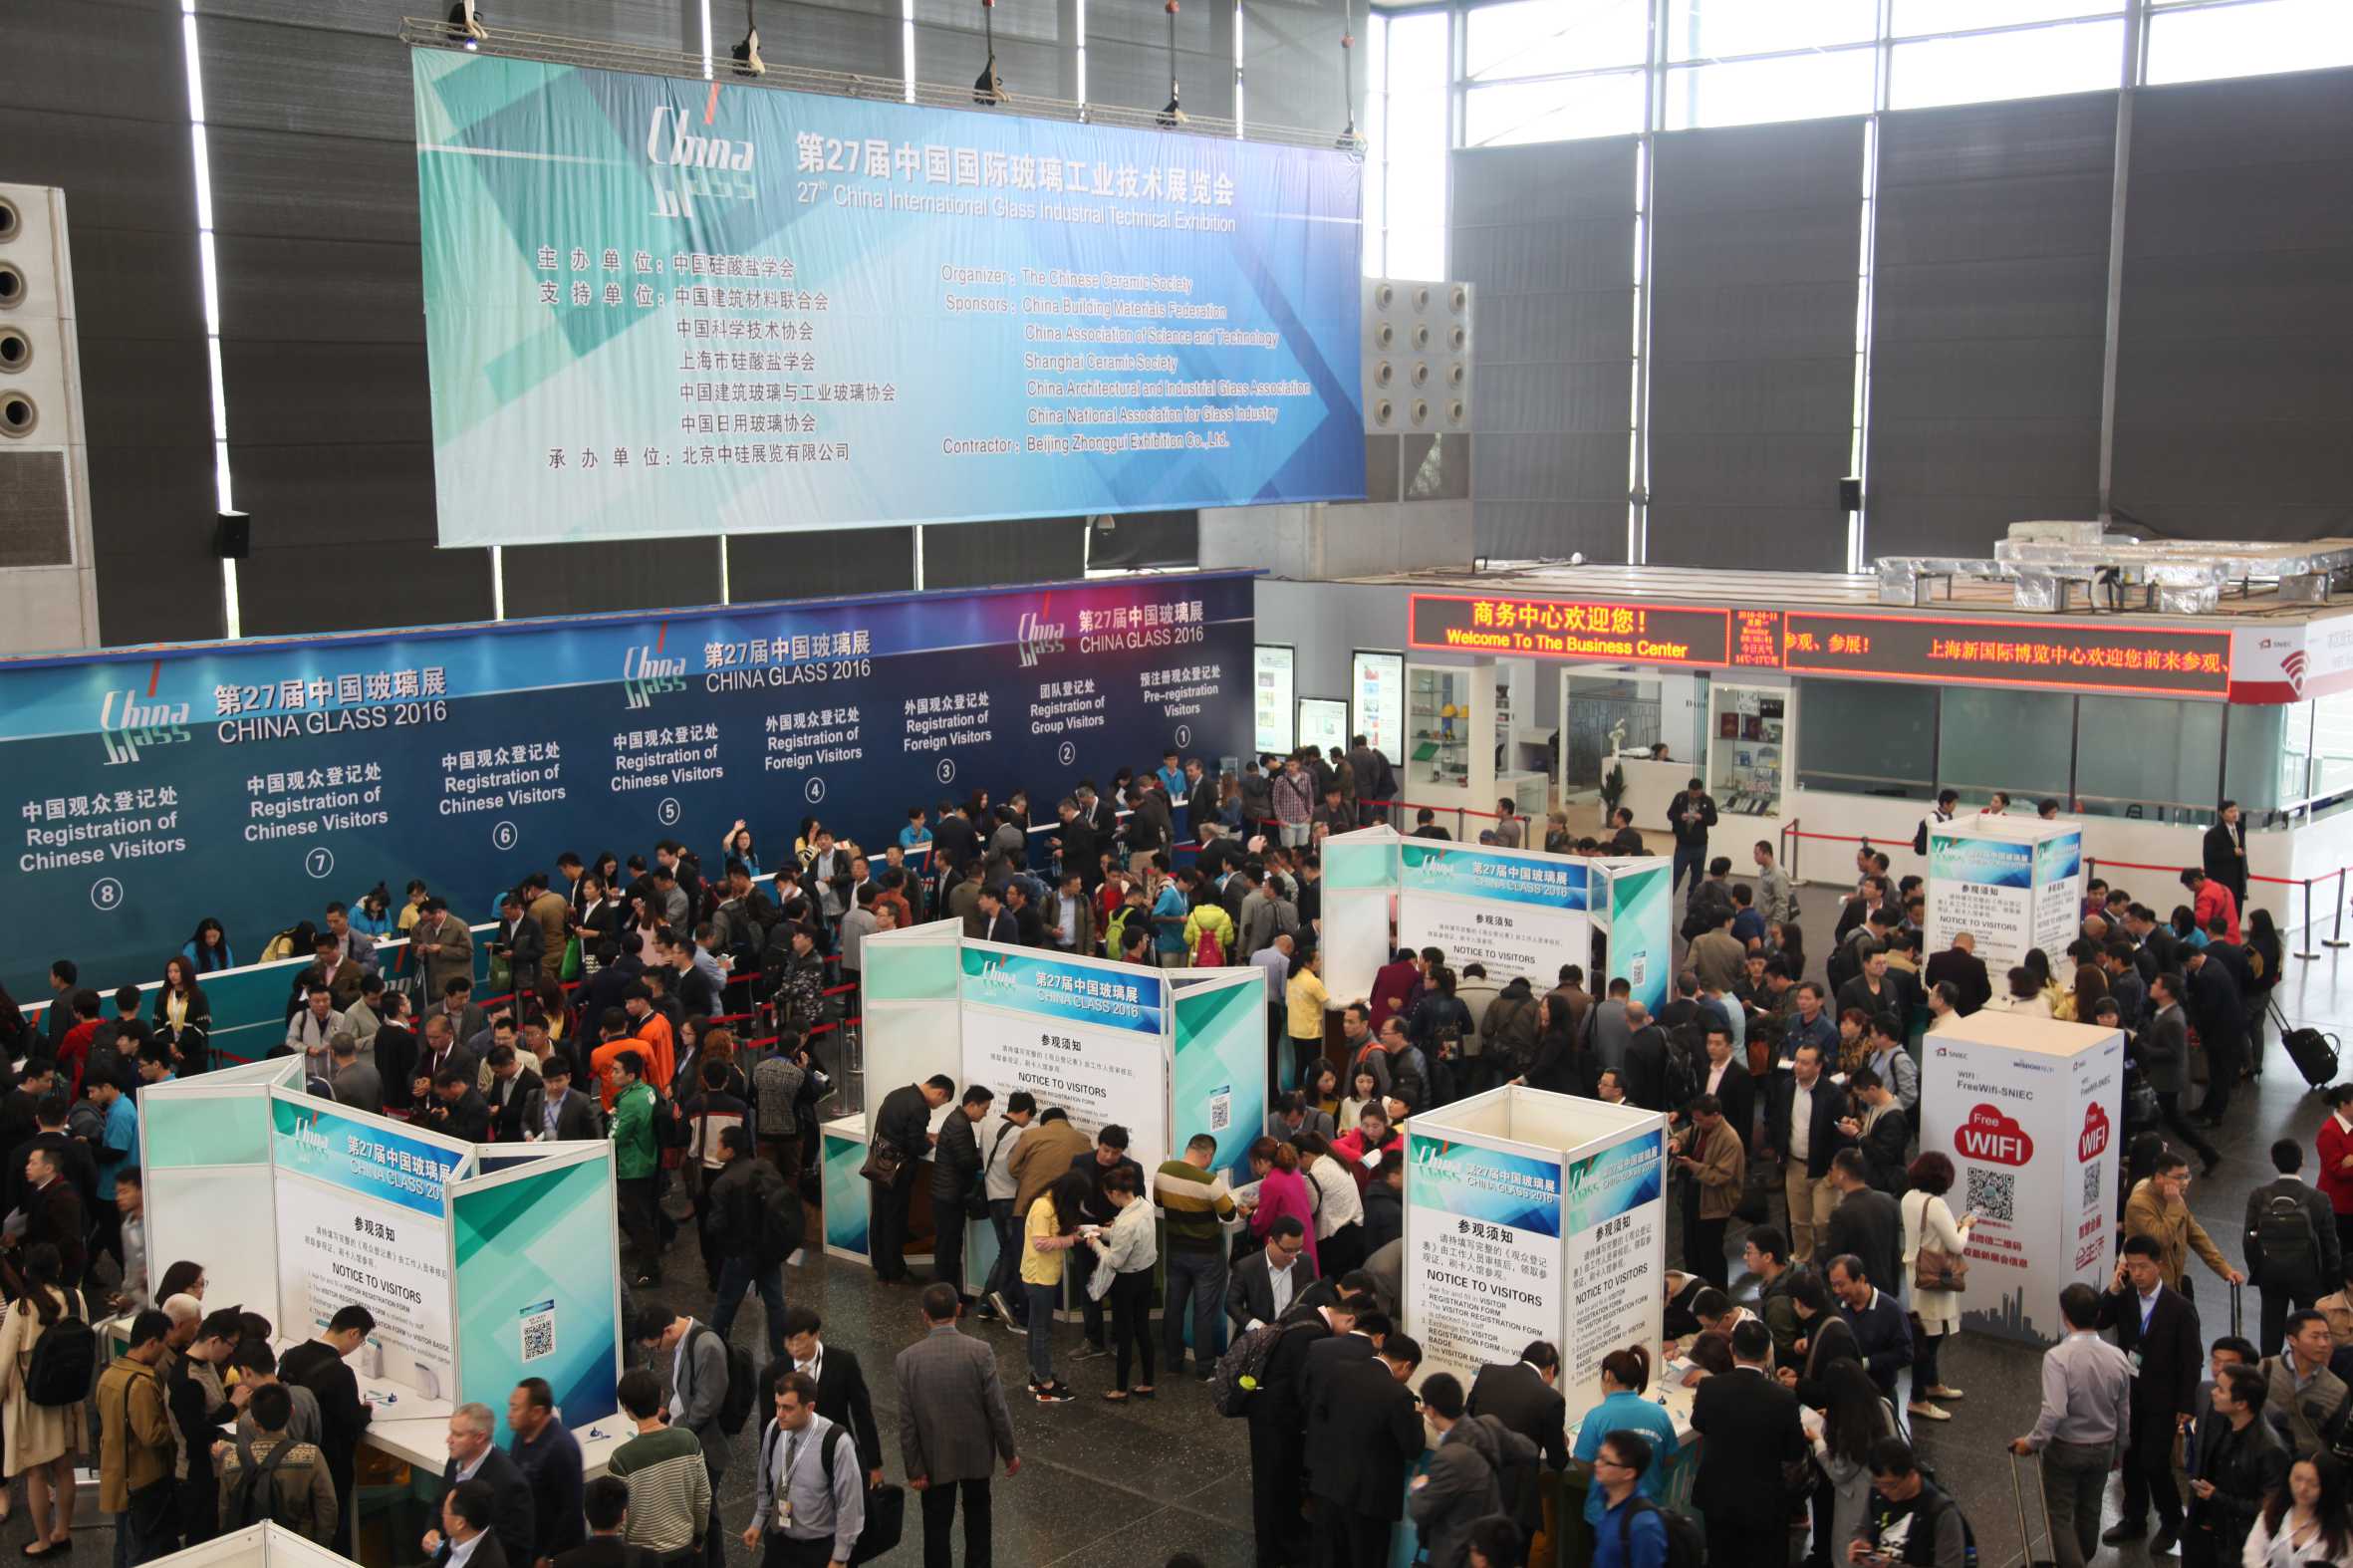 You Again at New Edition of the 31st China Glass Exhibition in